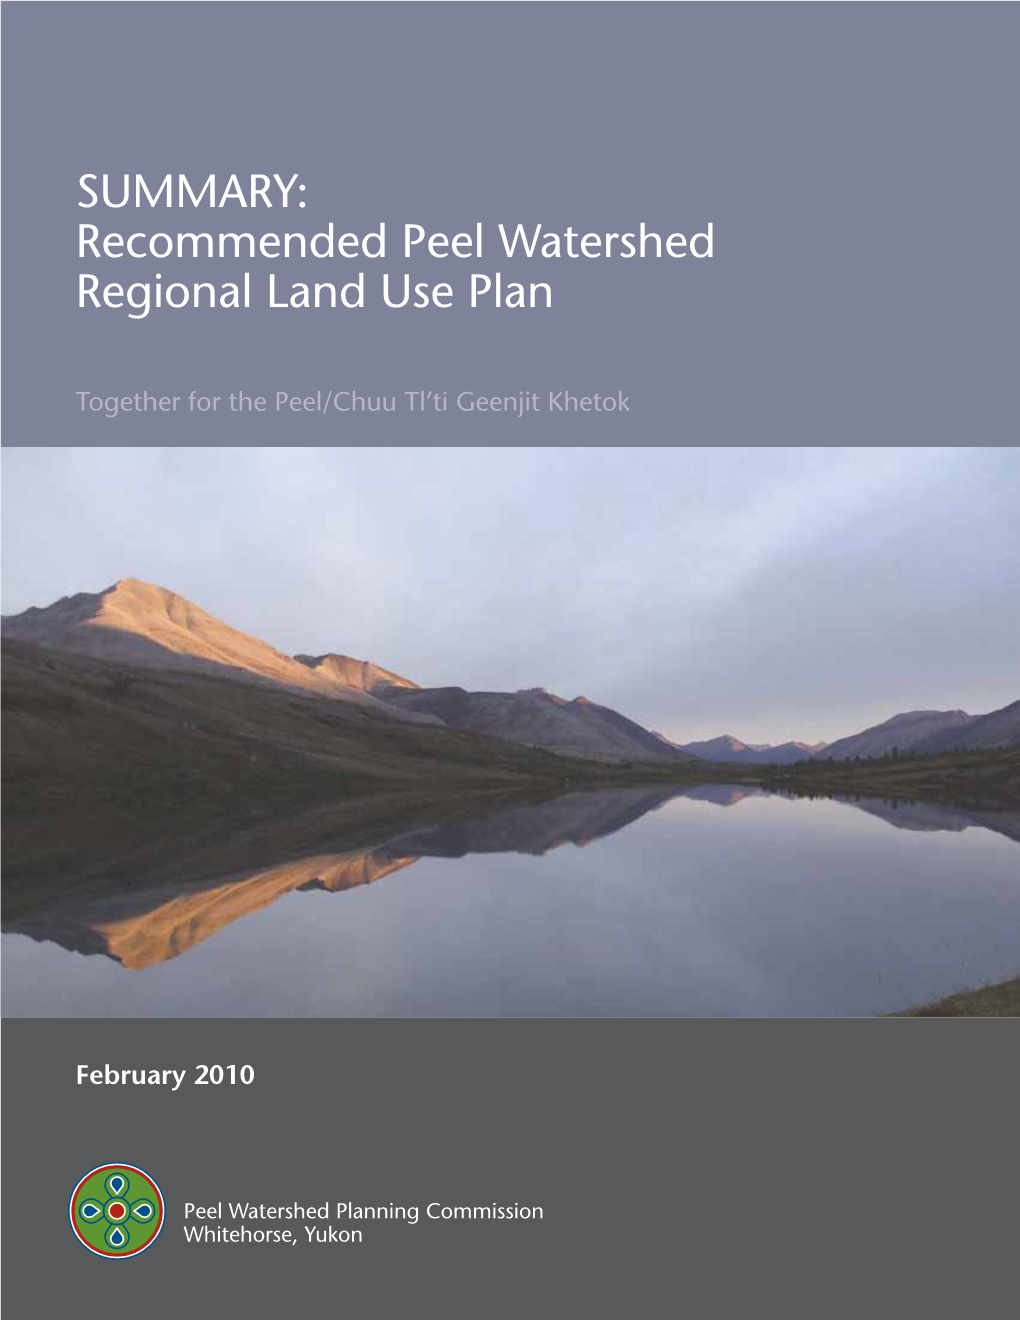 Summary: Recommended Peel Watershed Regional Land Use Plan